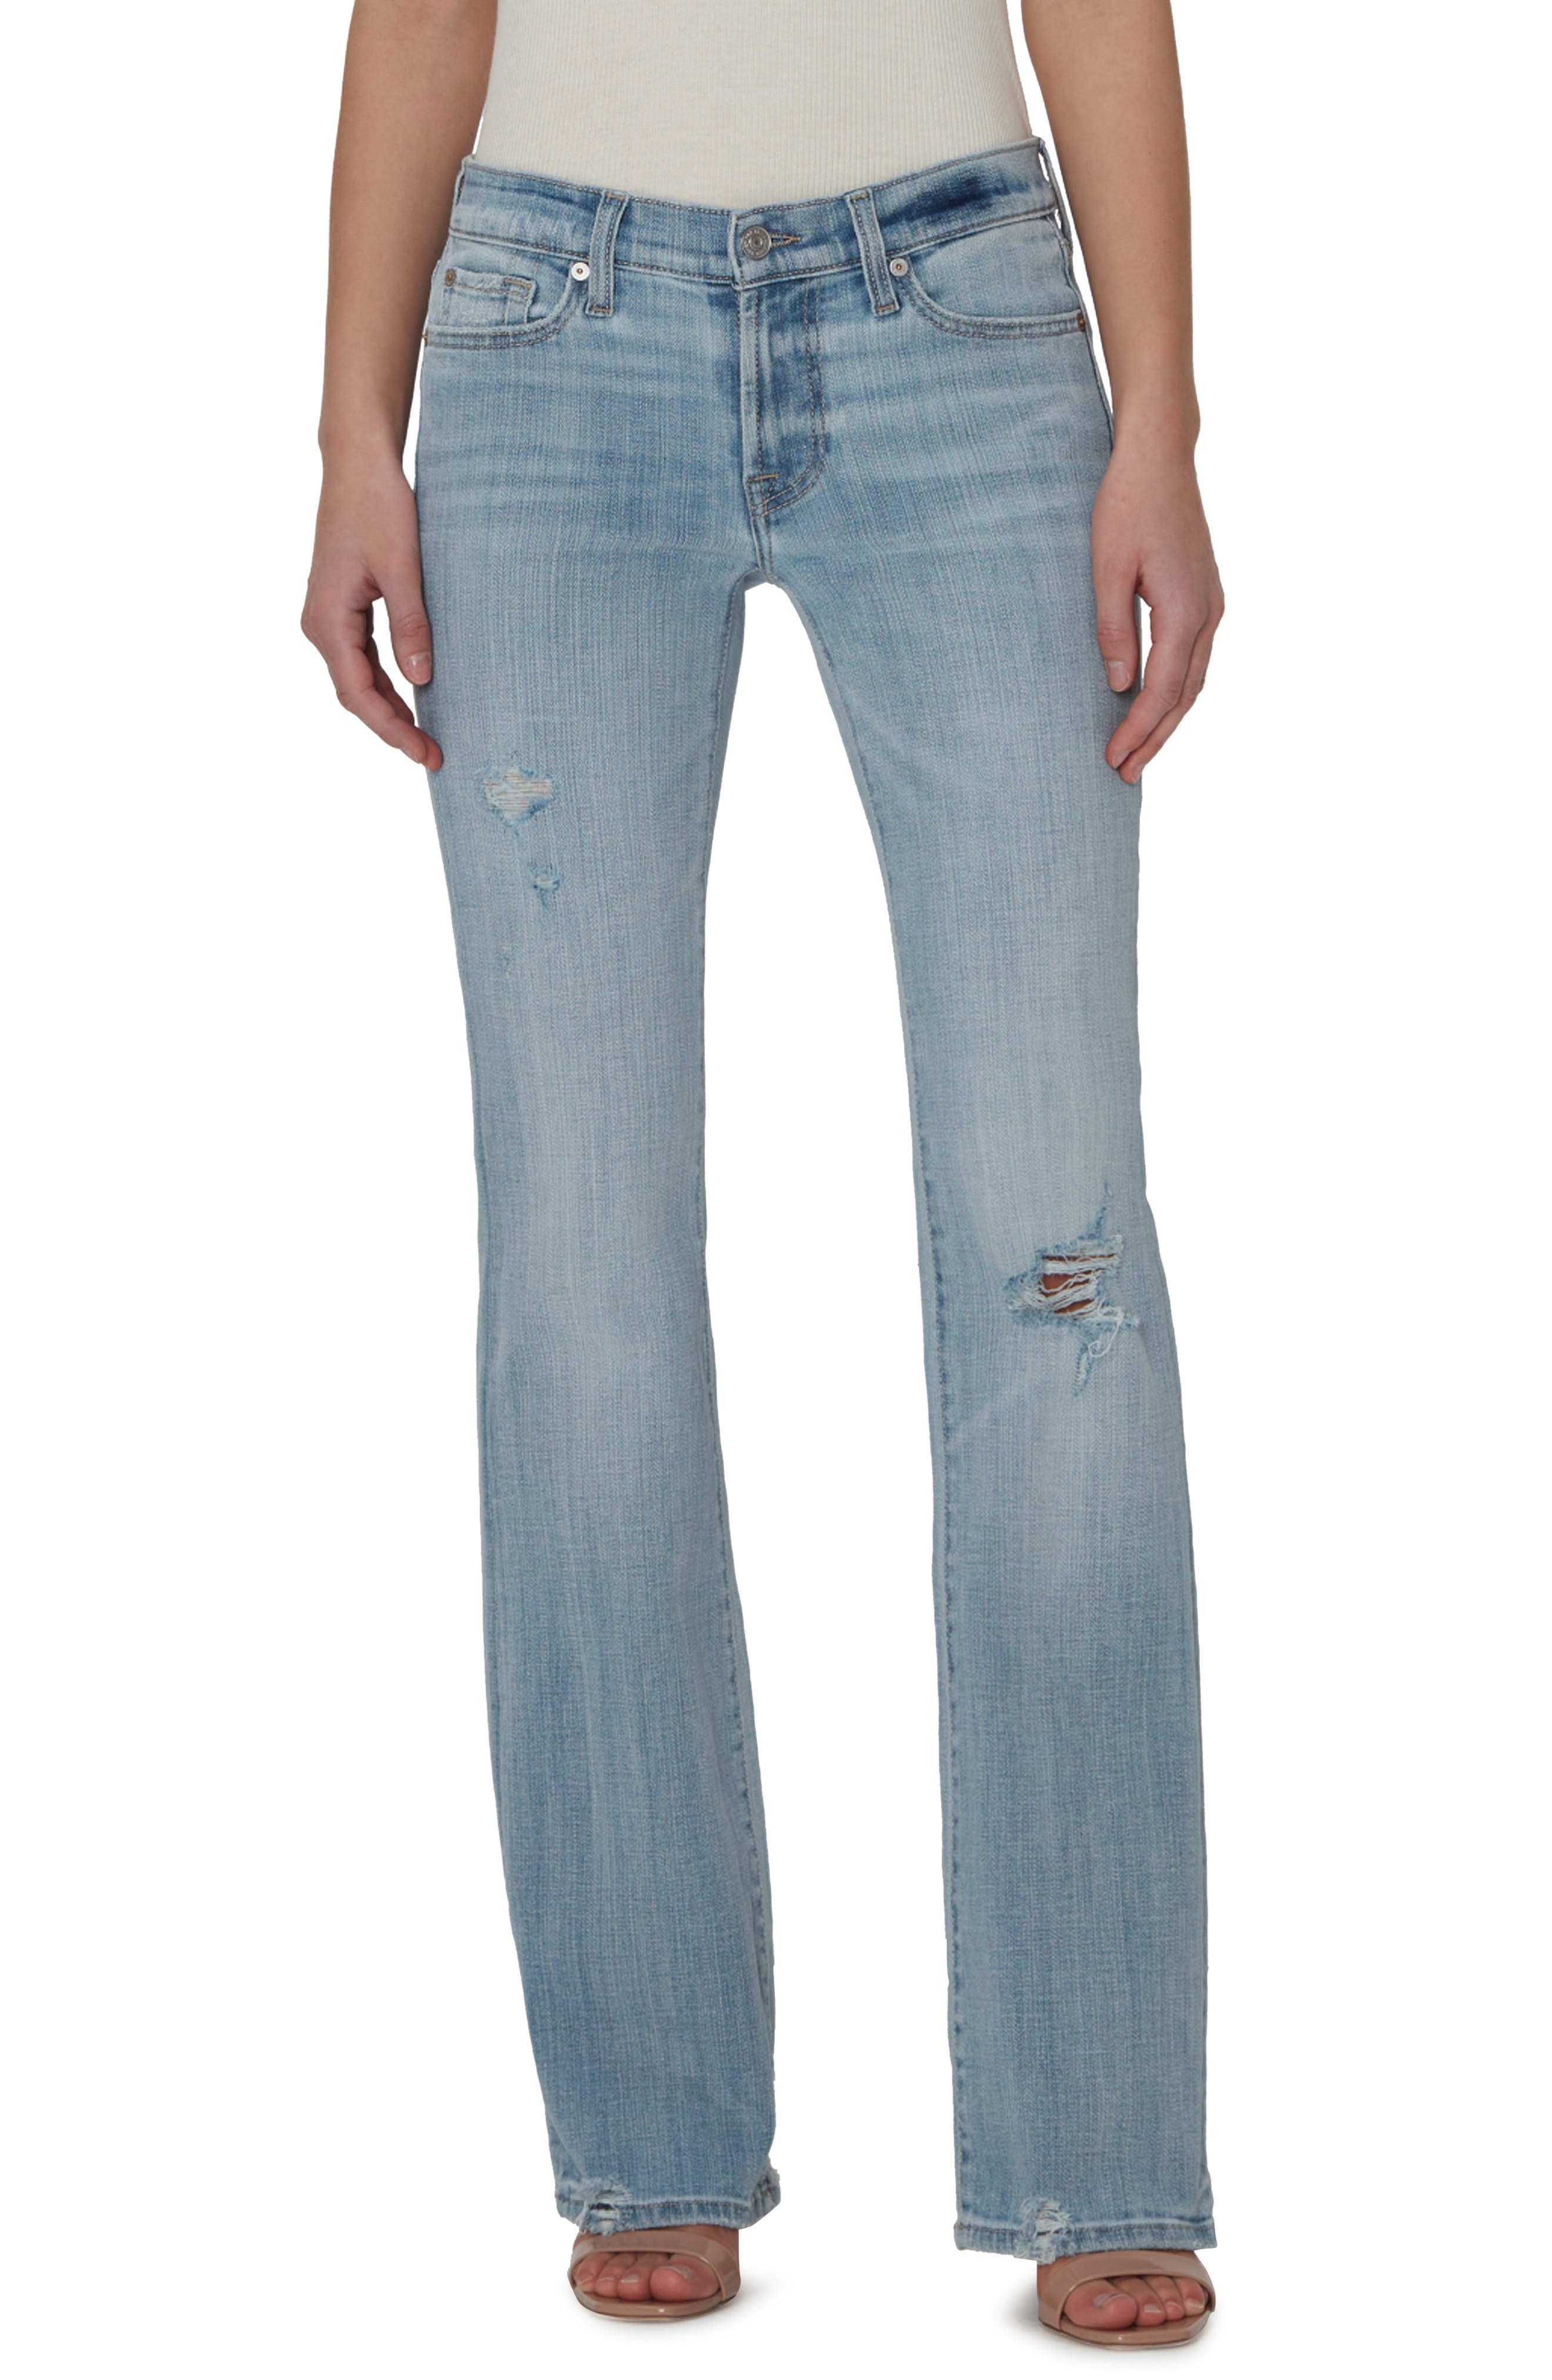 blau Boot-Cut Jeans 7 FOR ALL MANKIND W28 T 38 Boot-Cut Jeans 7 For All Mankind Damen Damen Kleidung 7 For All Mankind Damen Jeans 7 For All Mankind Damen Boot-Cut Jeans 7 For All Mankind Damen 